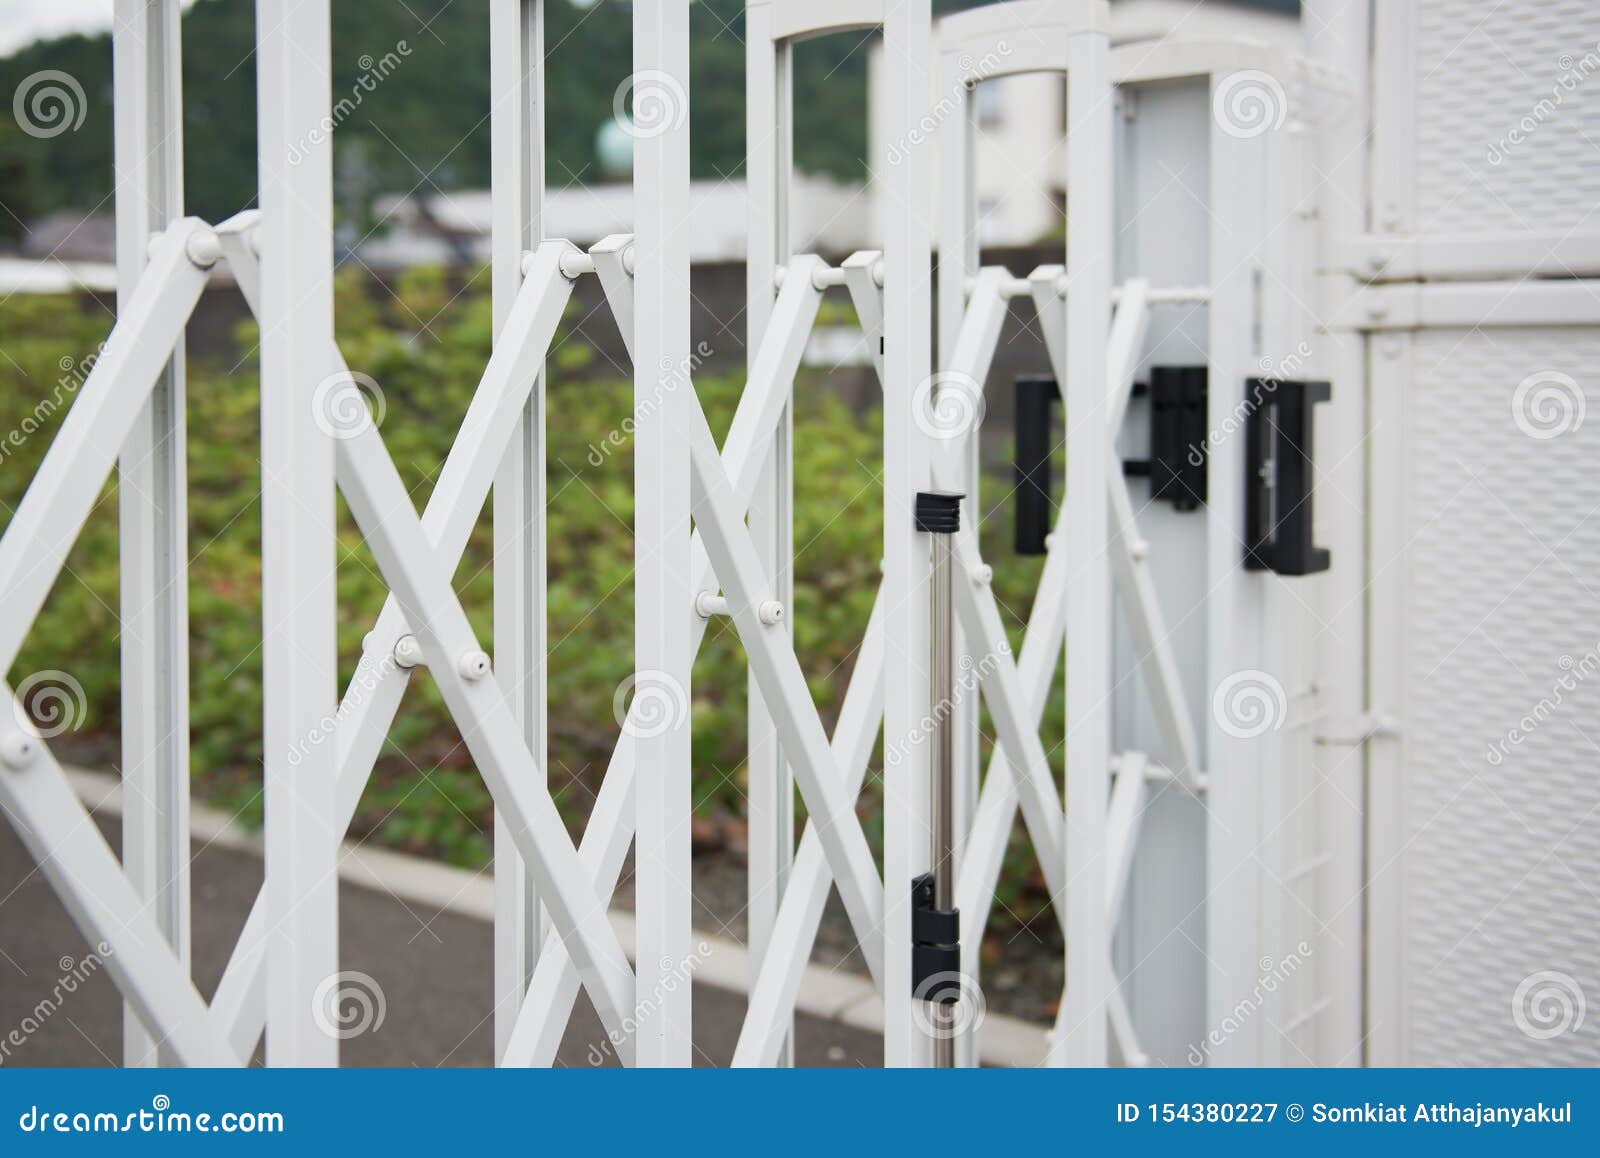 White Stainless Steel Barrier Gate for Protection in External ...